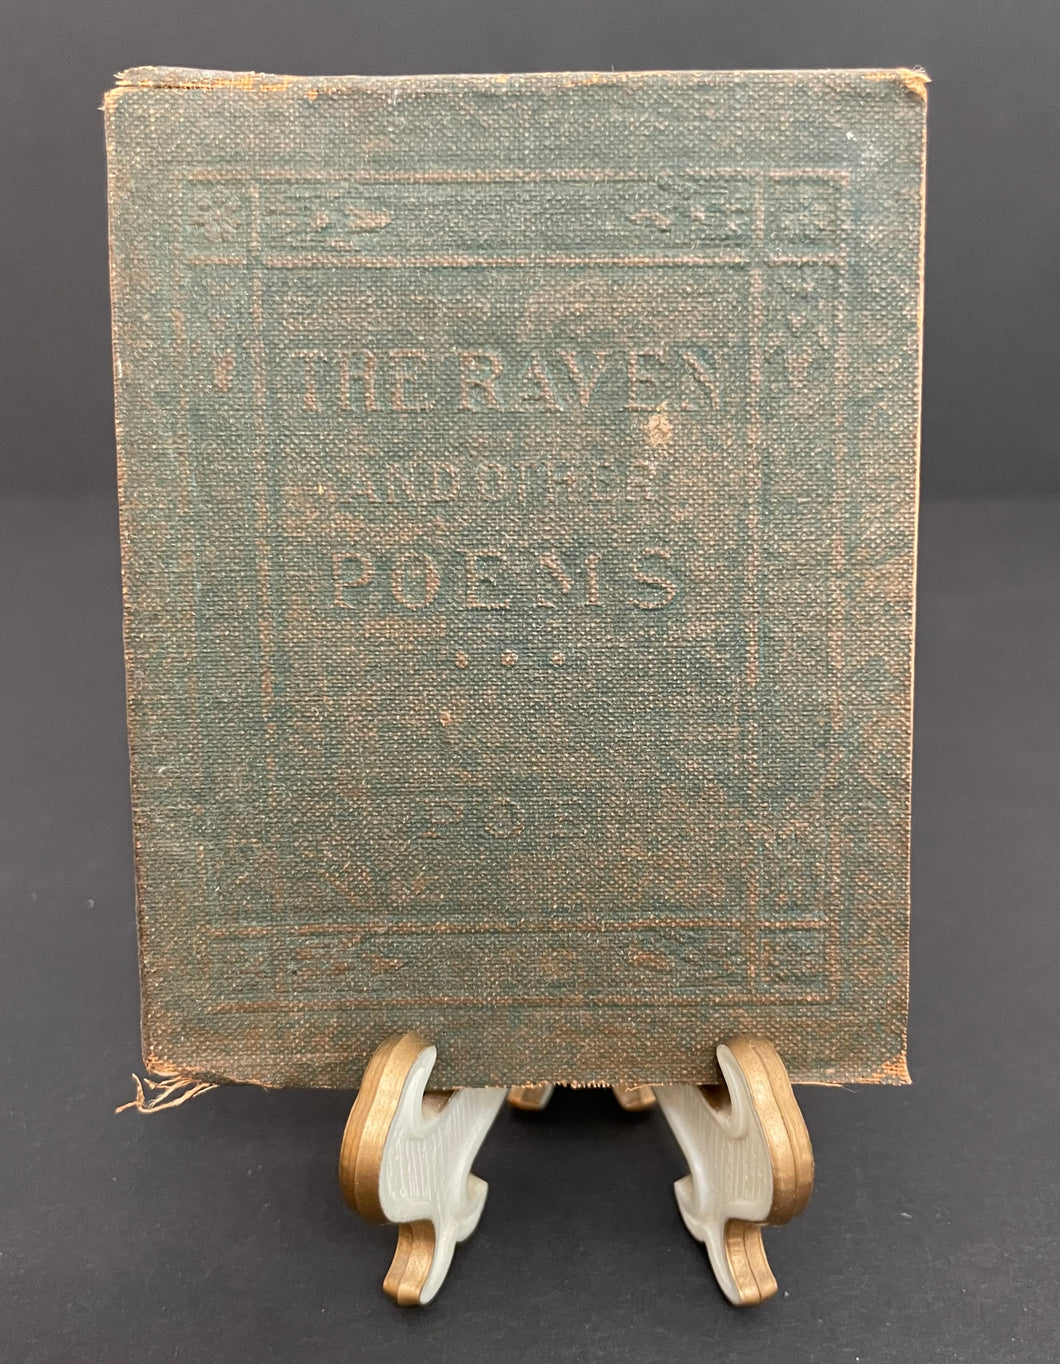 Antique Little Leather Library “The Raven and Other Poems” Vol II by Edgar Allen Poe Book